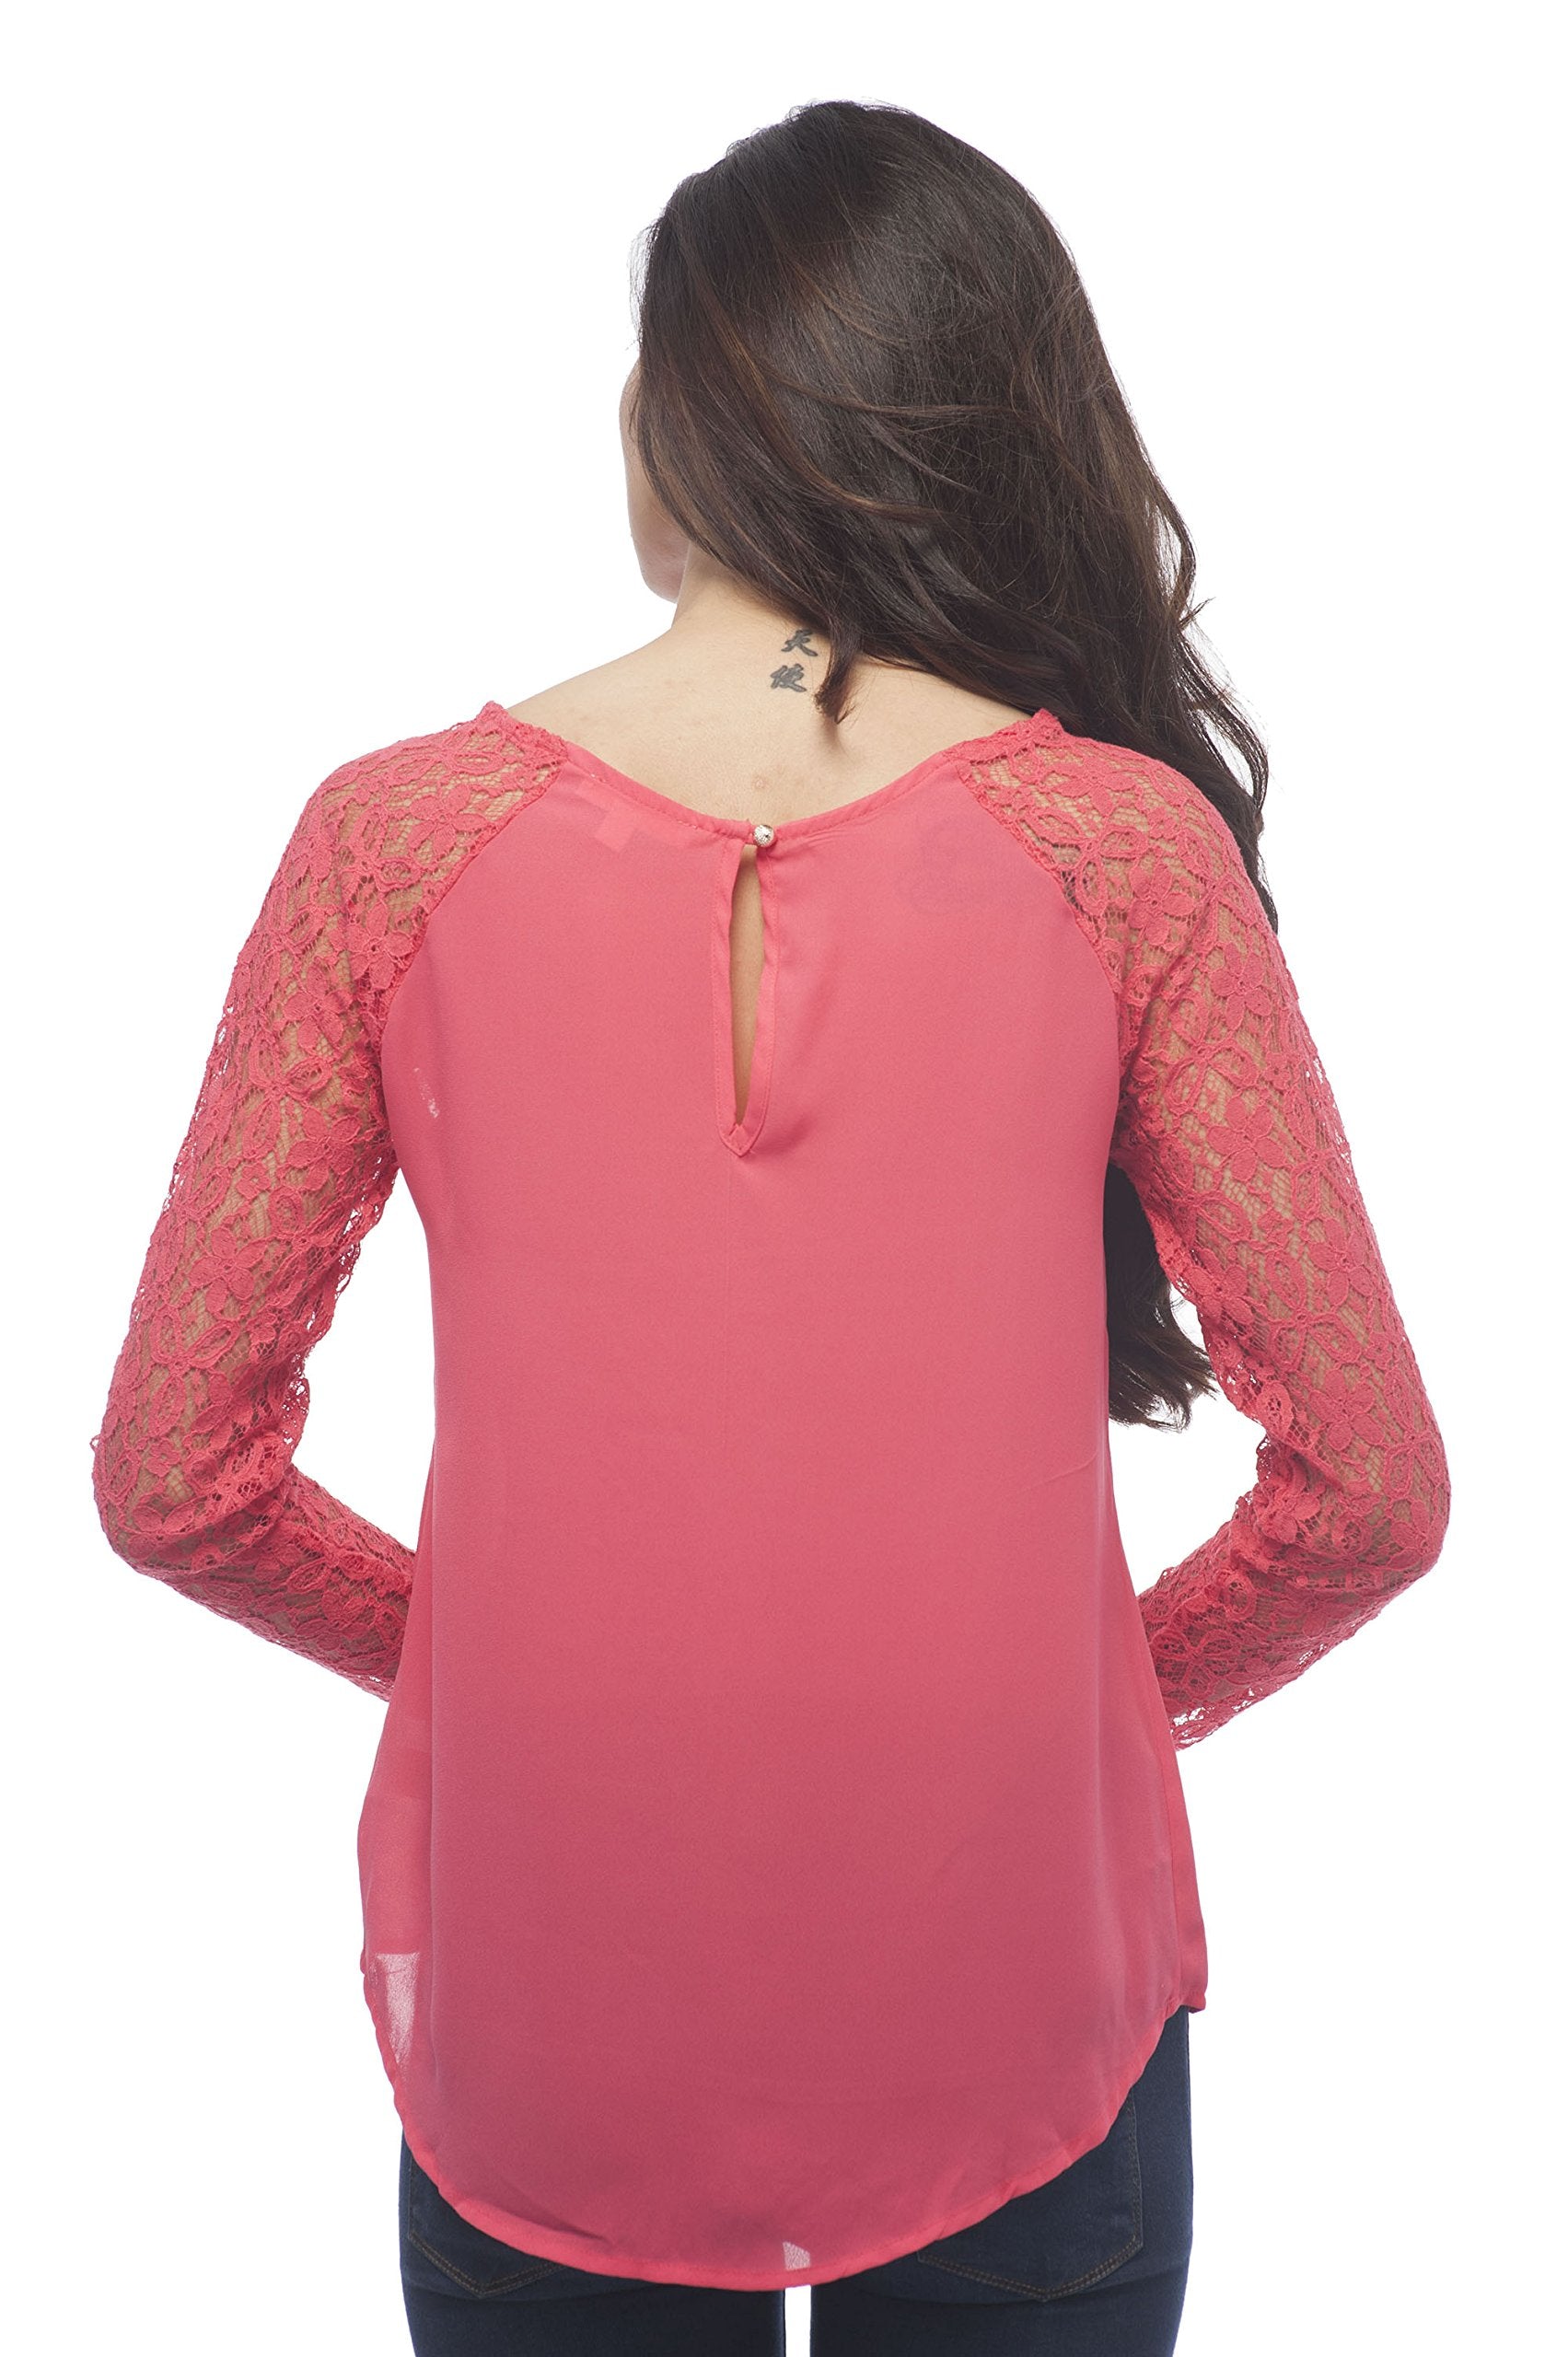 Hollywood Star Fashion Long Sleeve Lace Raglan Top With Back Button